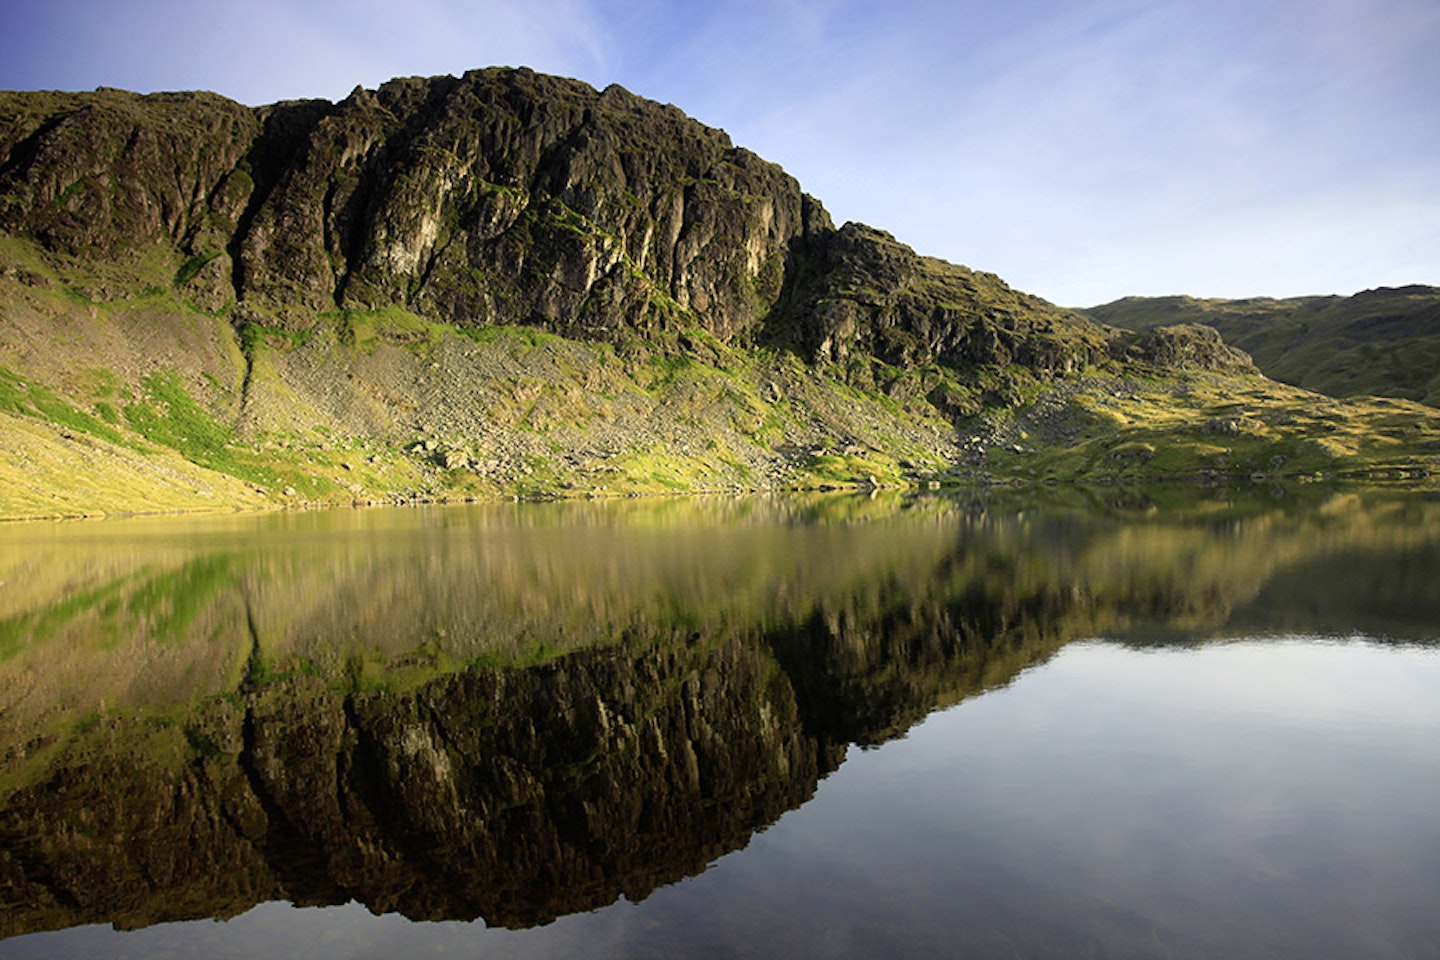 Pavey Ark over Stickle Tarn, with Jack's Rake running up across the face from right to left.